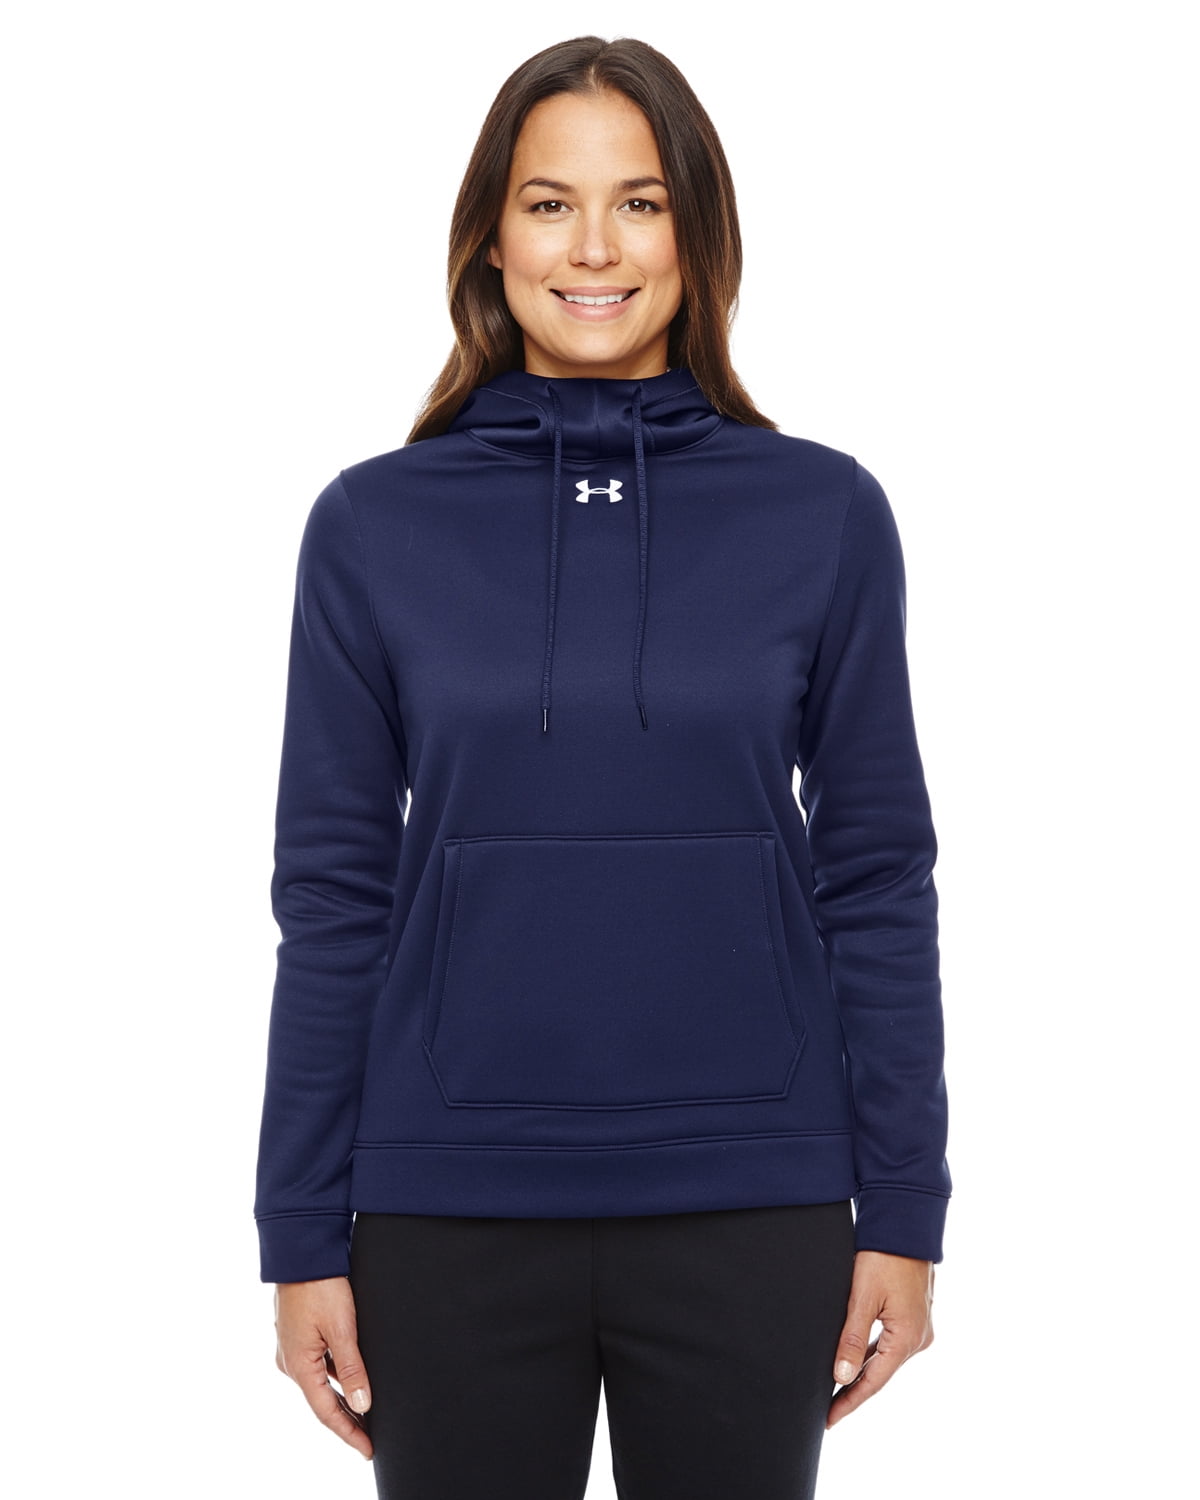 womens under armour storm hoodie